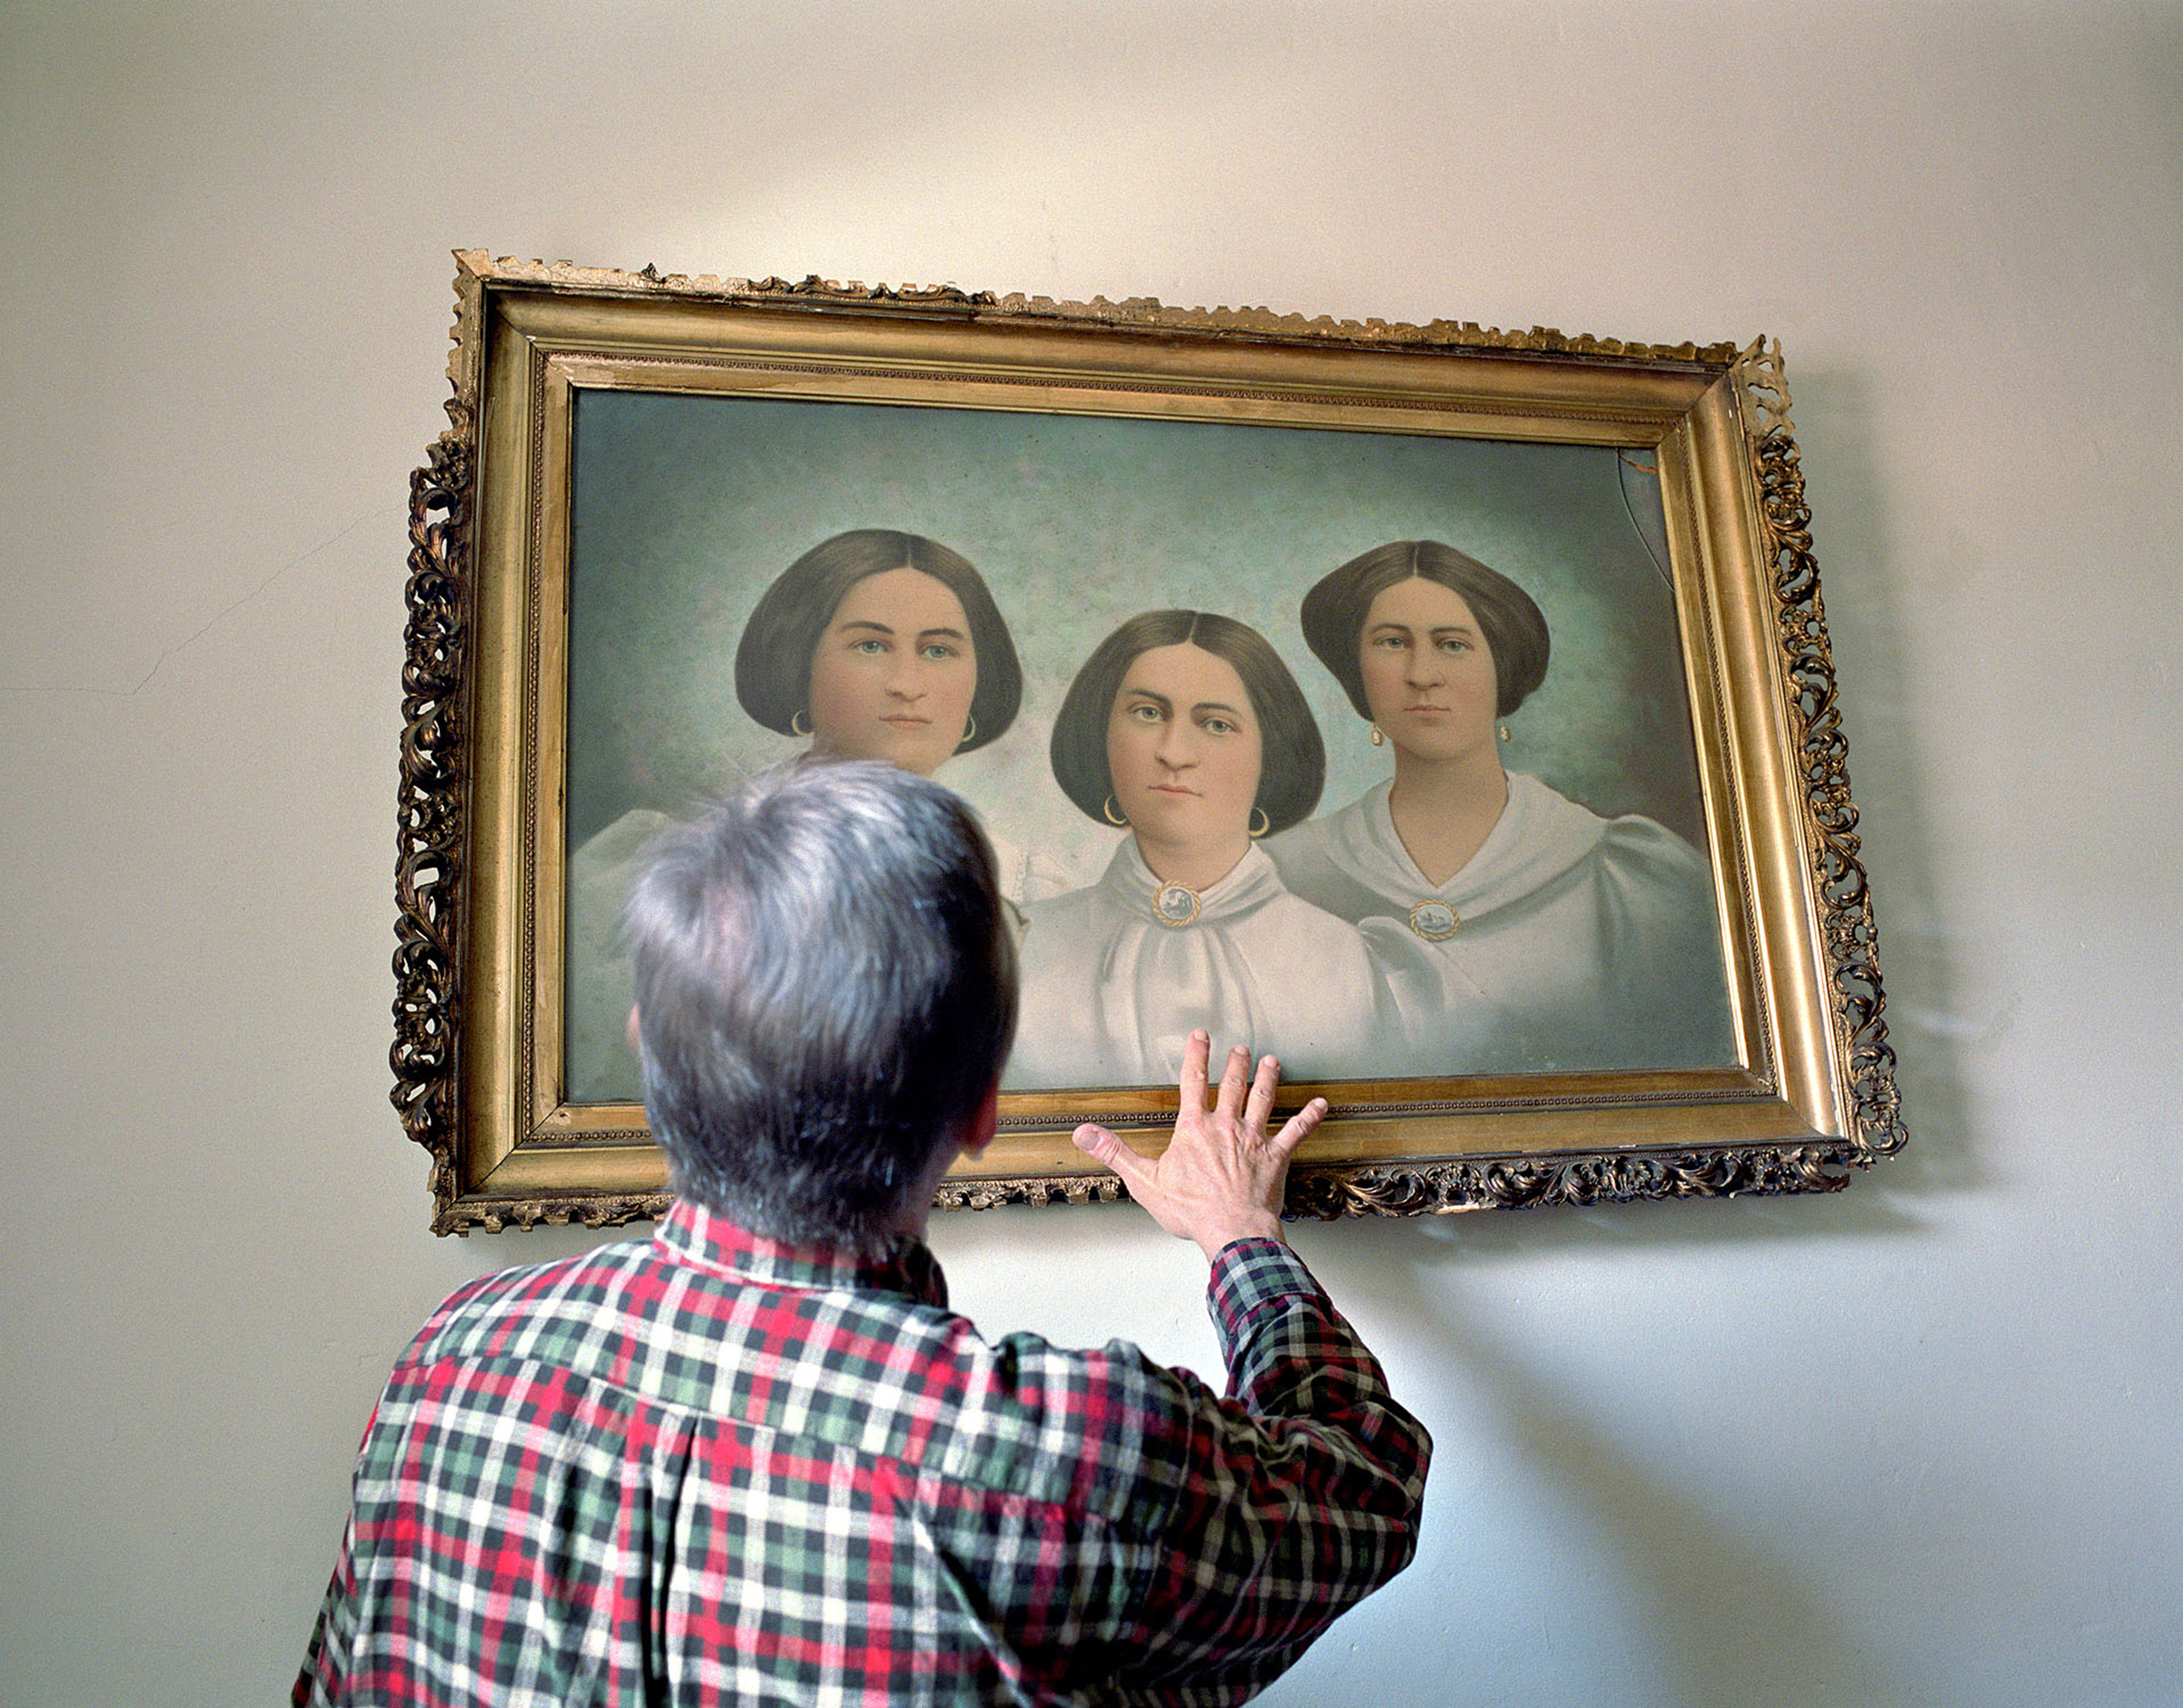 Lily Dale historian Ron Nagy with a painting of the Fox sisters, founders of Spiritualism.